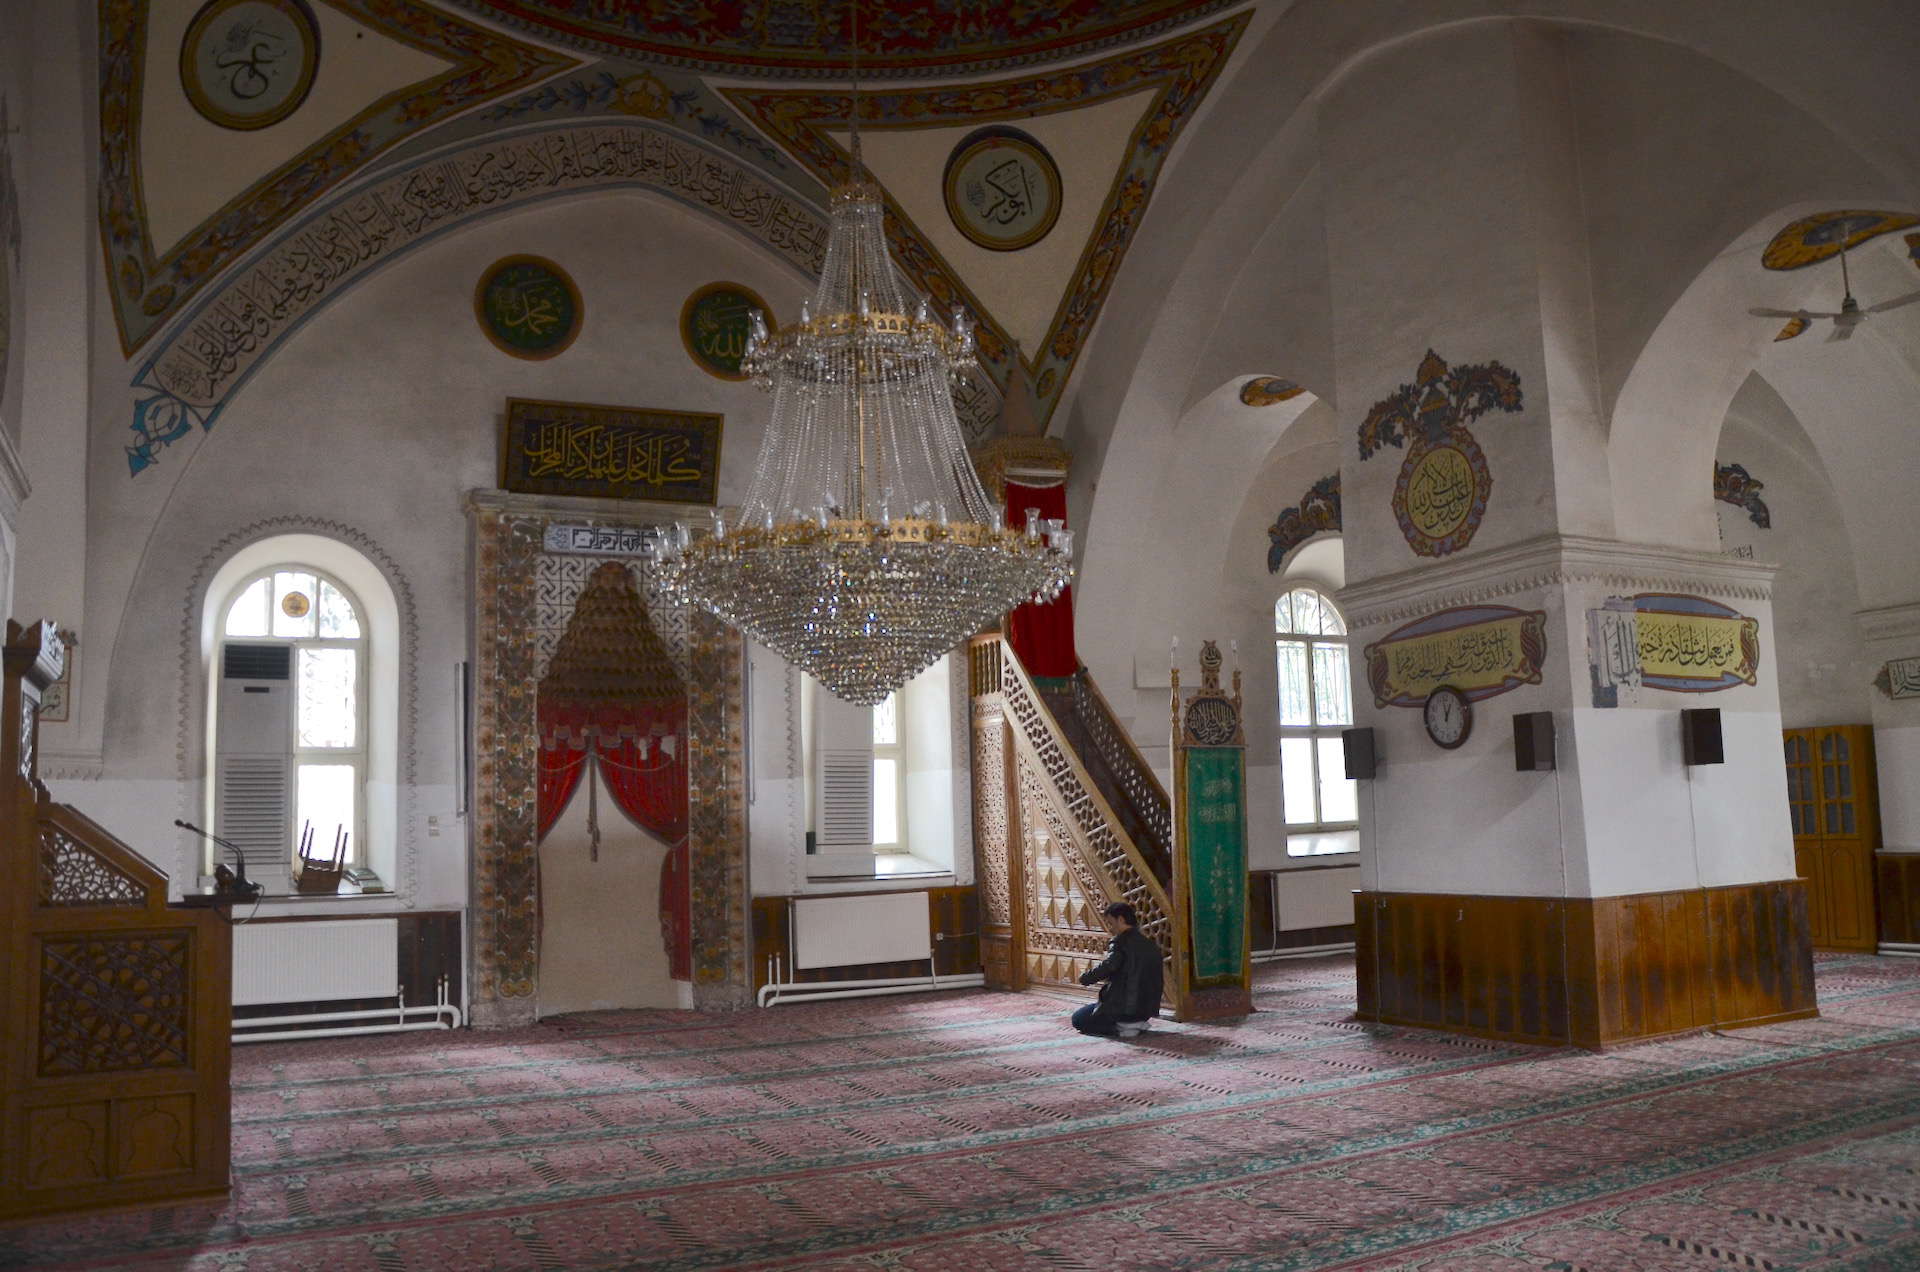 Prayer hall of the Great Mosque in Uşak, Turkey